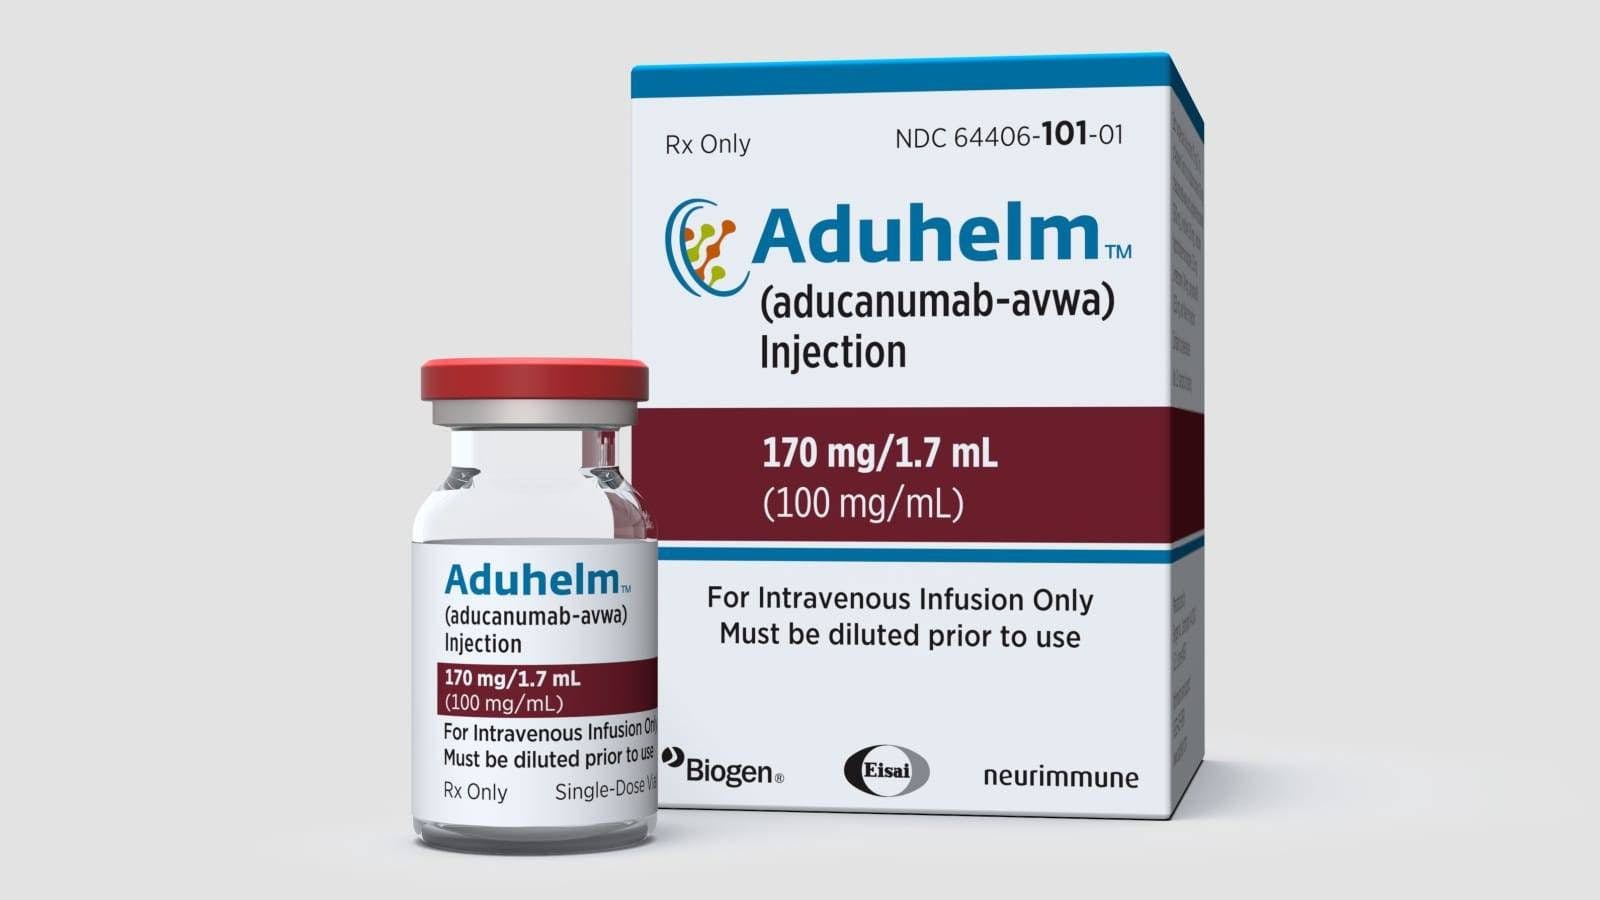 Aduhelm Approved and Nothing But Controversy Since 